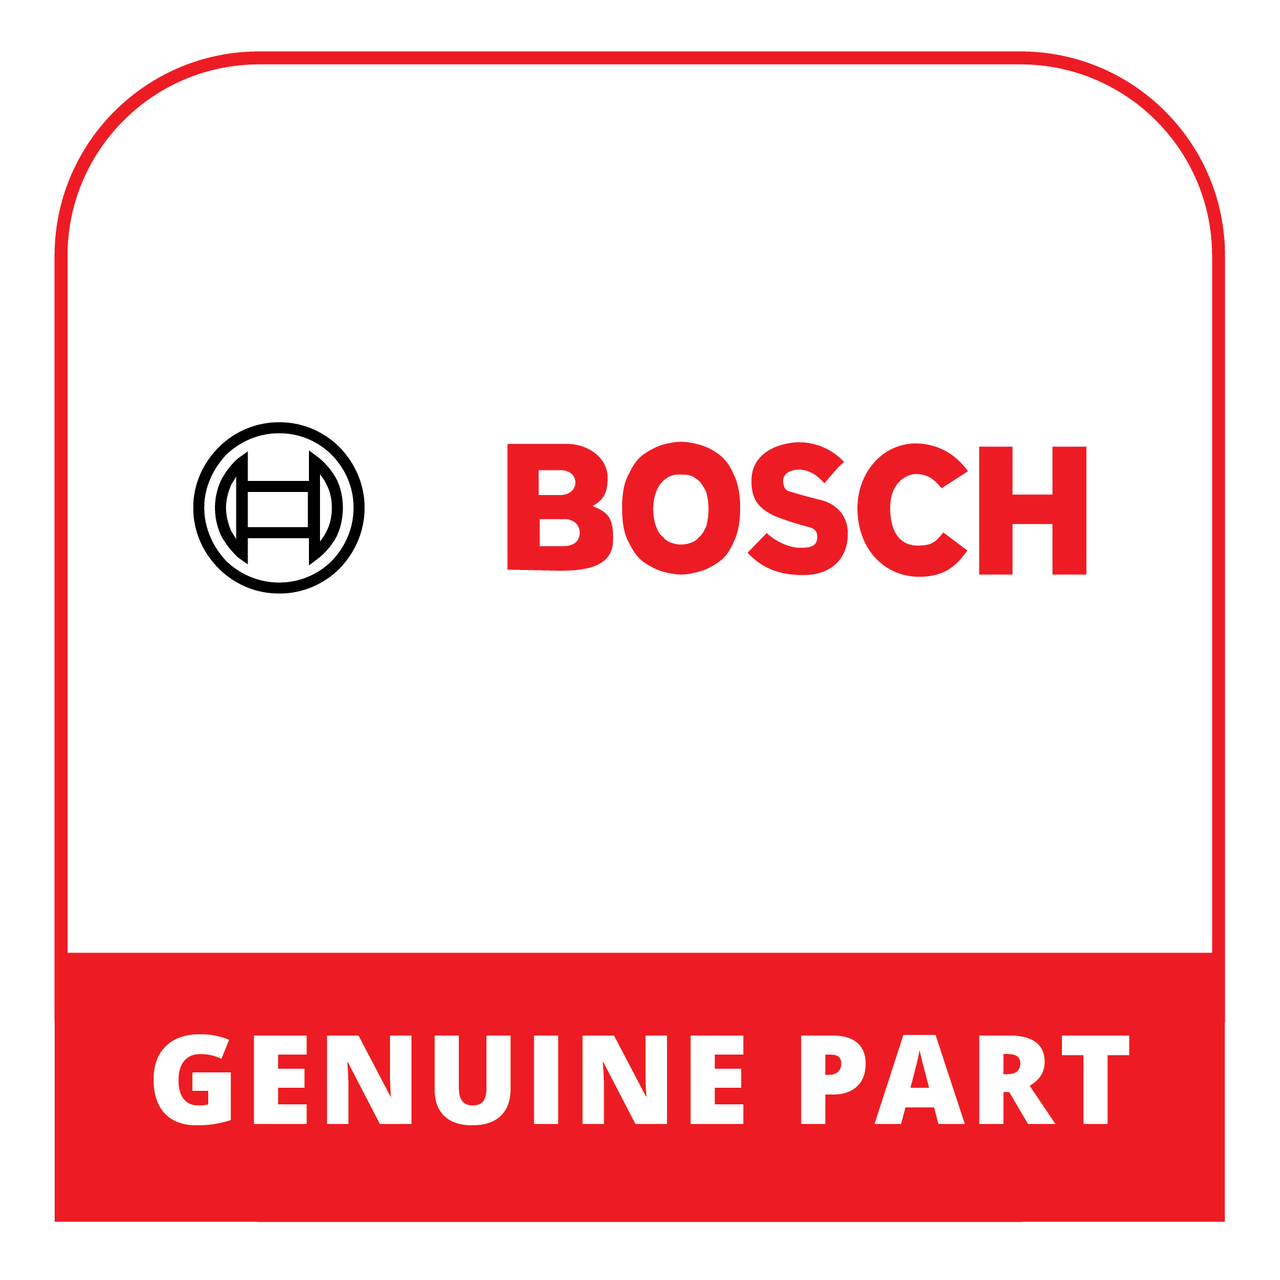 Bosch (Thermador) 18063706 - Instruction Manual - Genuine Bosch (Thermador) Part